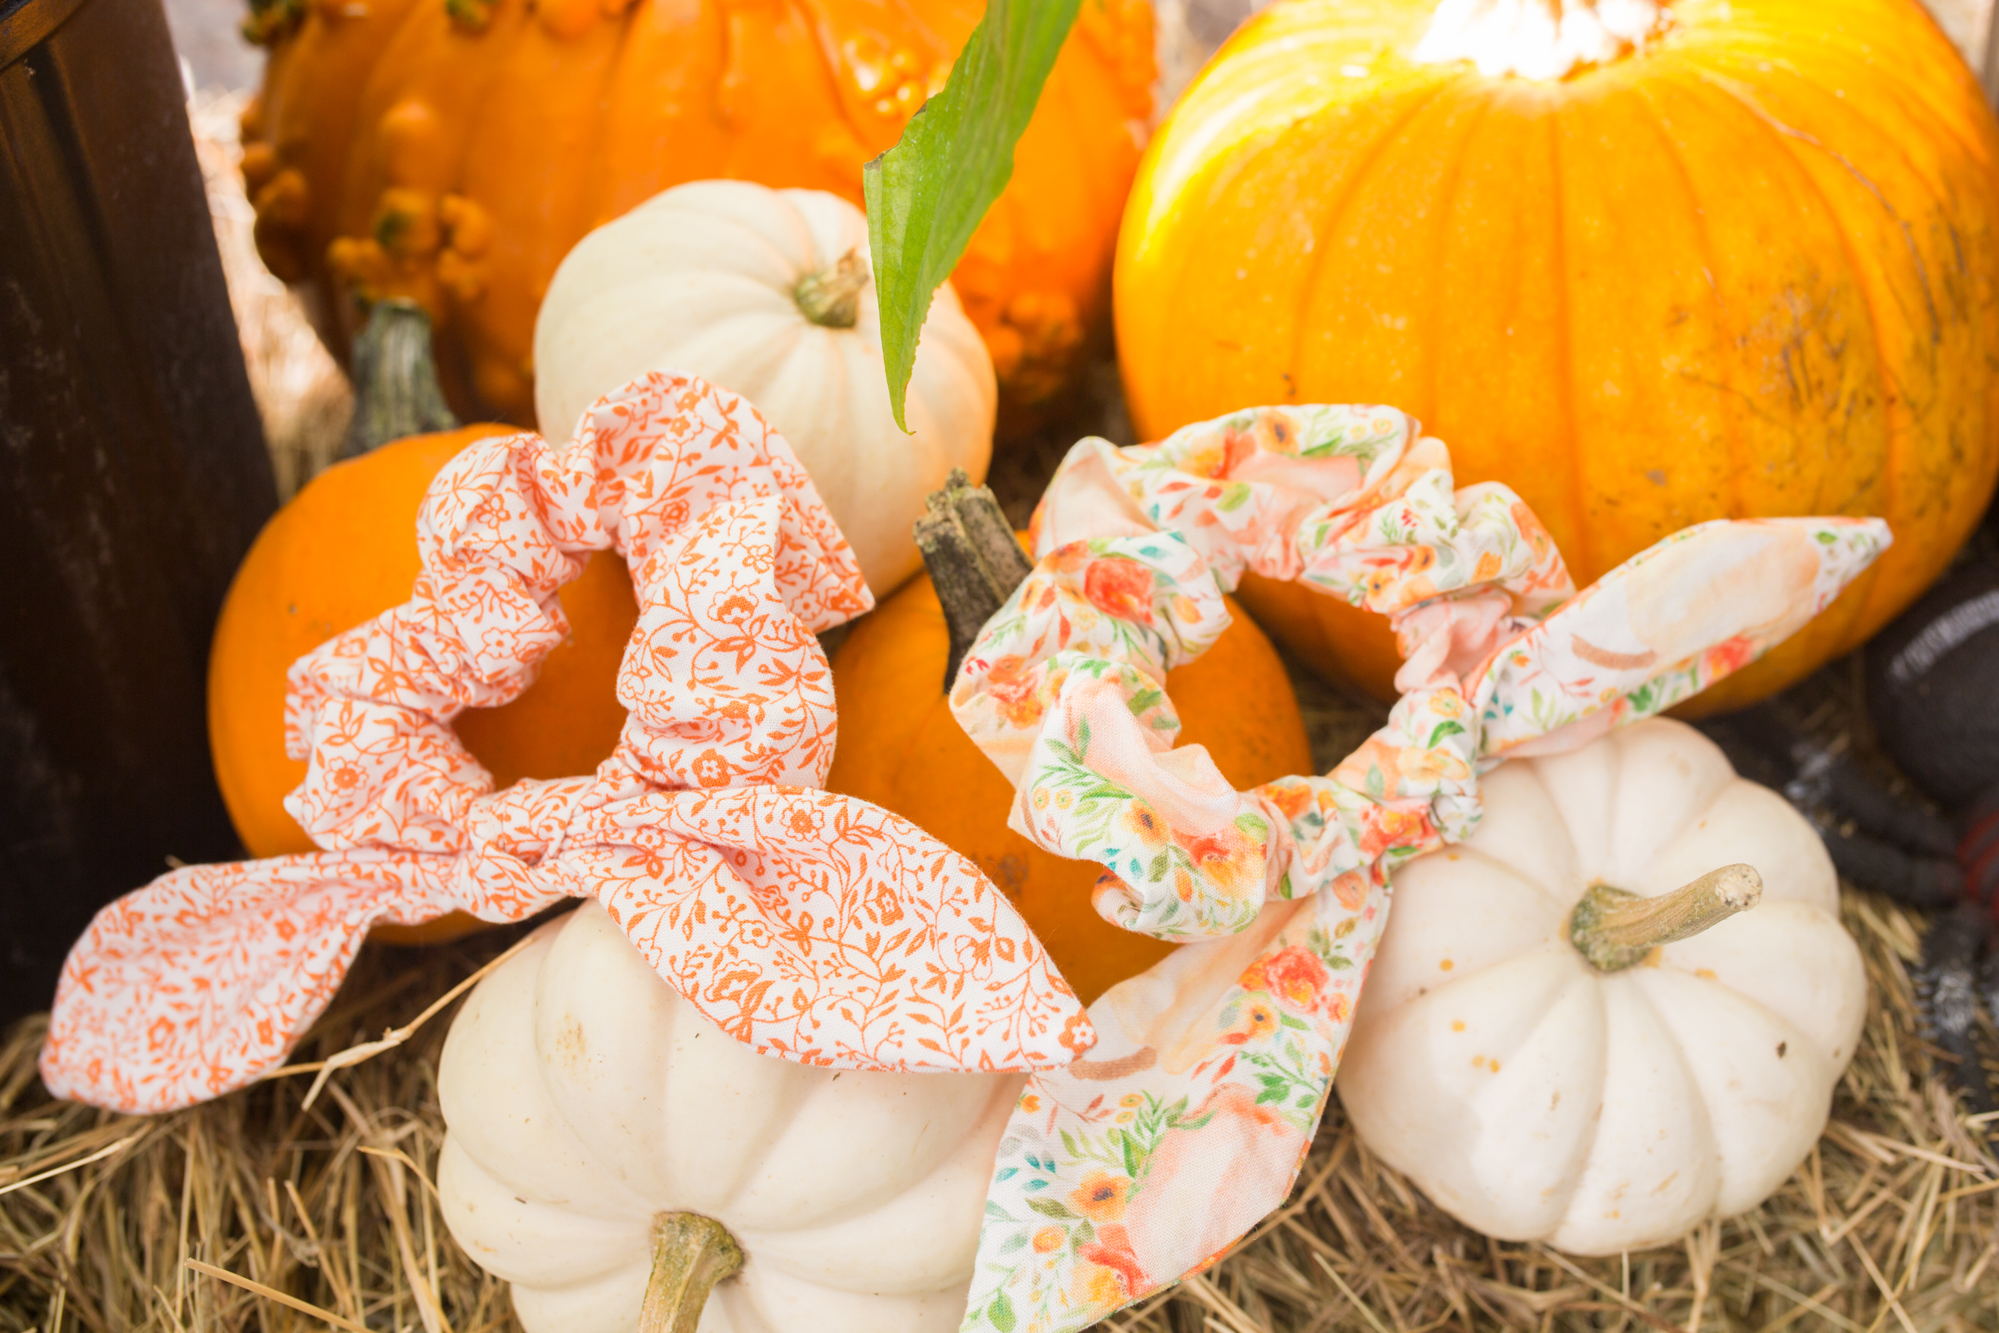 Pumpkin Patch / Pumpkin Fall Scrunchie / Bow Scrunchie / Fall Outfit Women / Fall Outfit Ideas Casual / Fall Fashion Outfits / Fall Style - Sunshine Style - A Florida Fashion and Lifestyle Blog by Katie